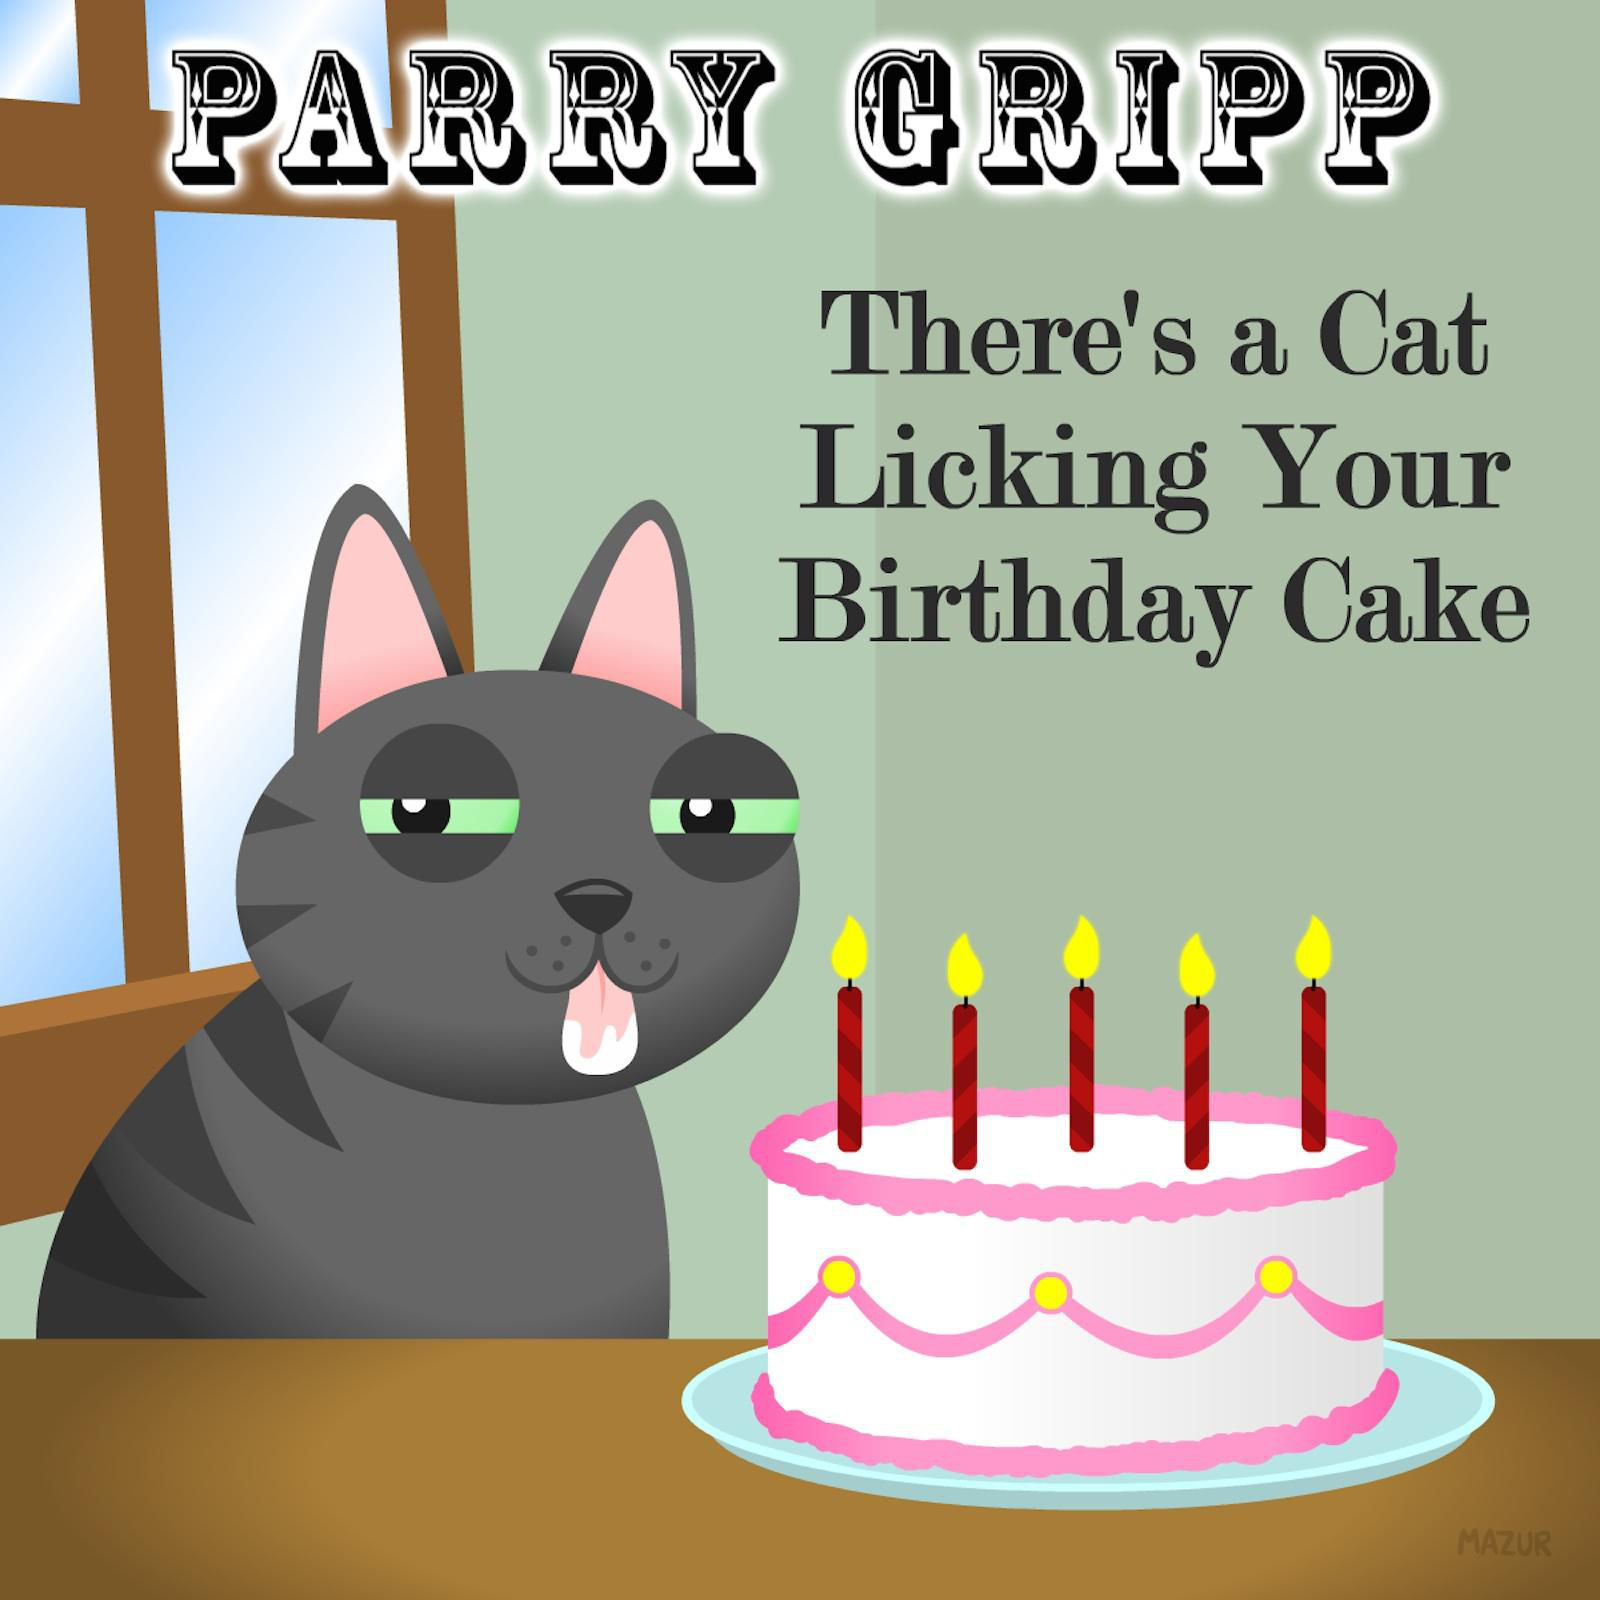 There'S A Cat Licking Your Birthday Cake
 There s a Cat Licking Your Birthday Cake Single by Parry